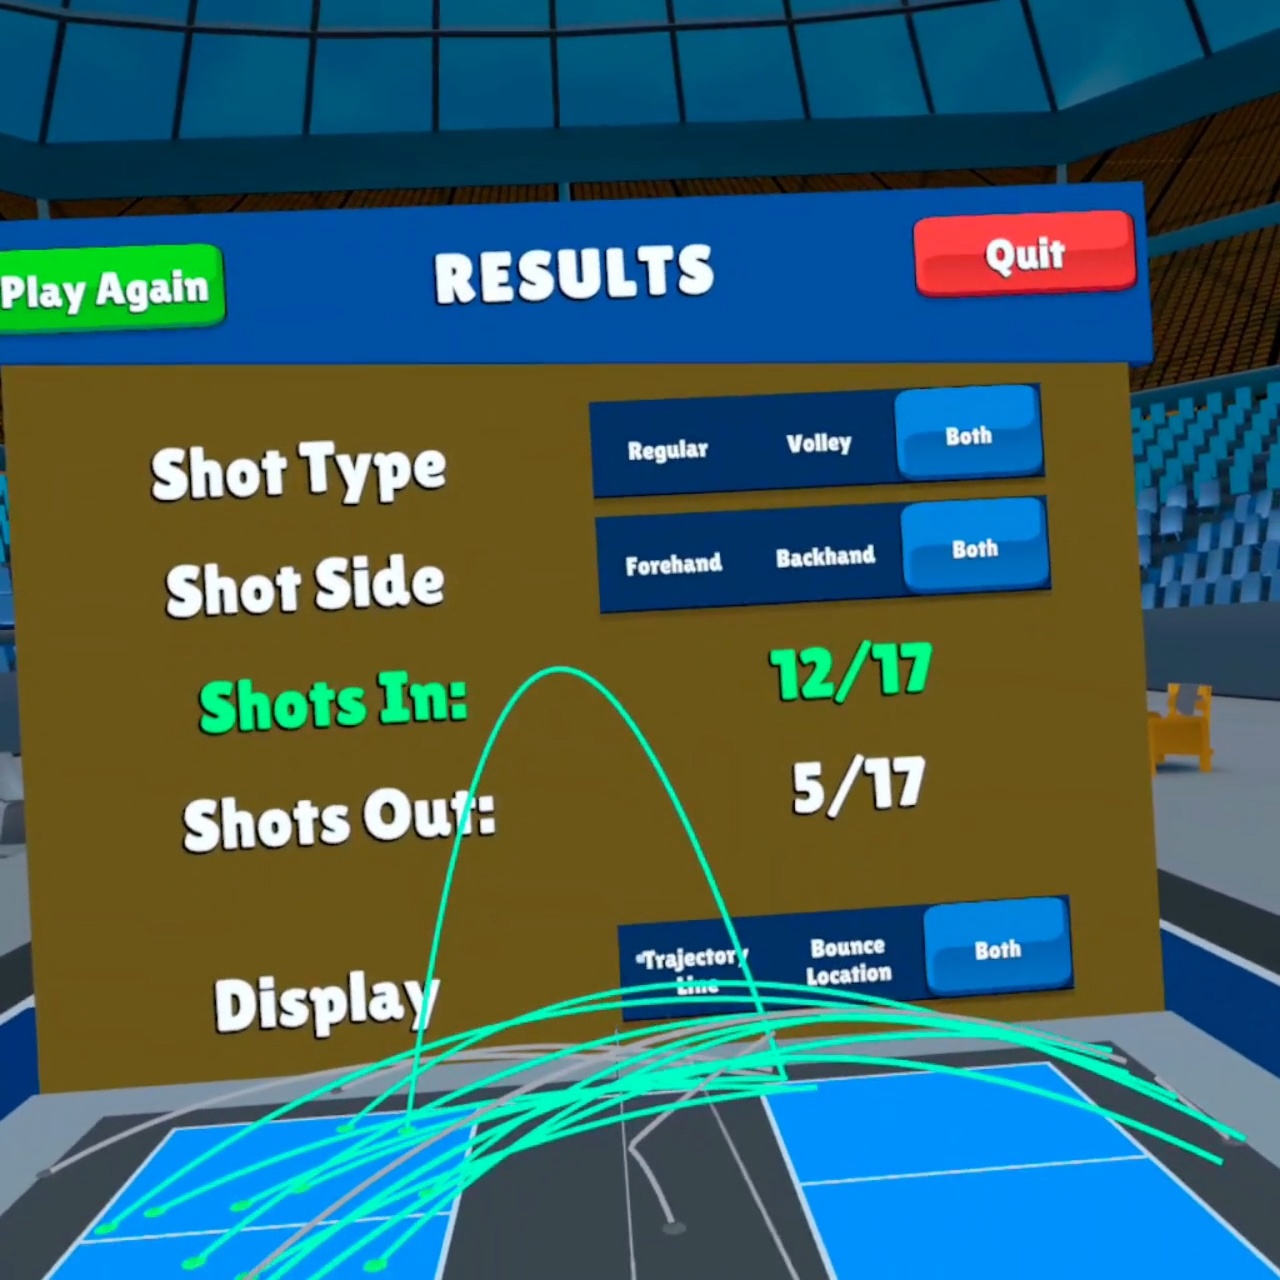 Playin Pickleball - In Game Results screen displaying results.